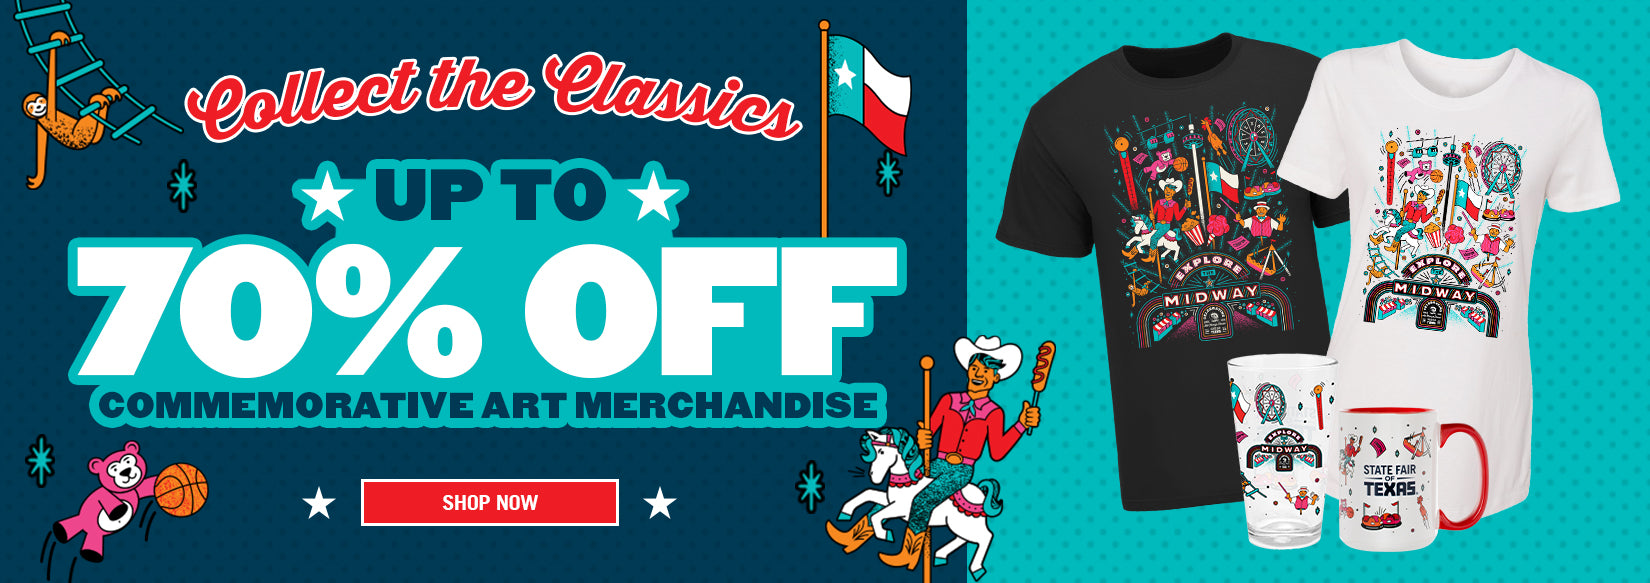 Save 35% On Select Big Tex Styles - SHOP NOW